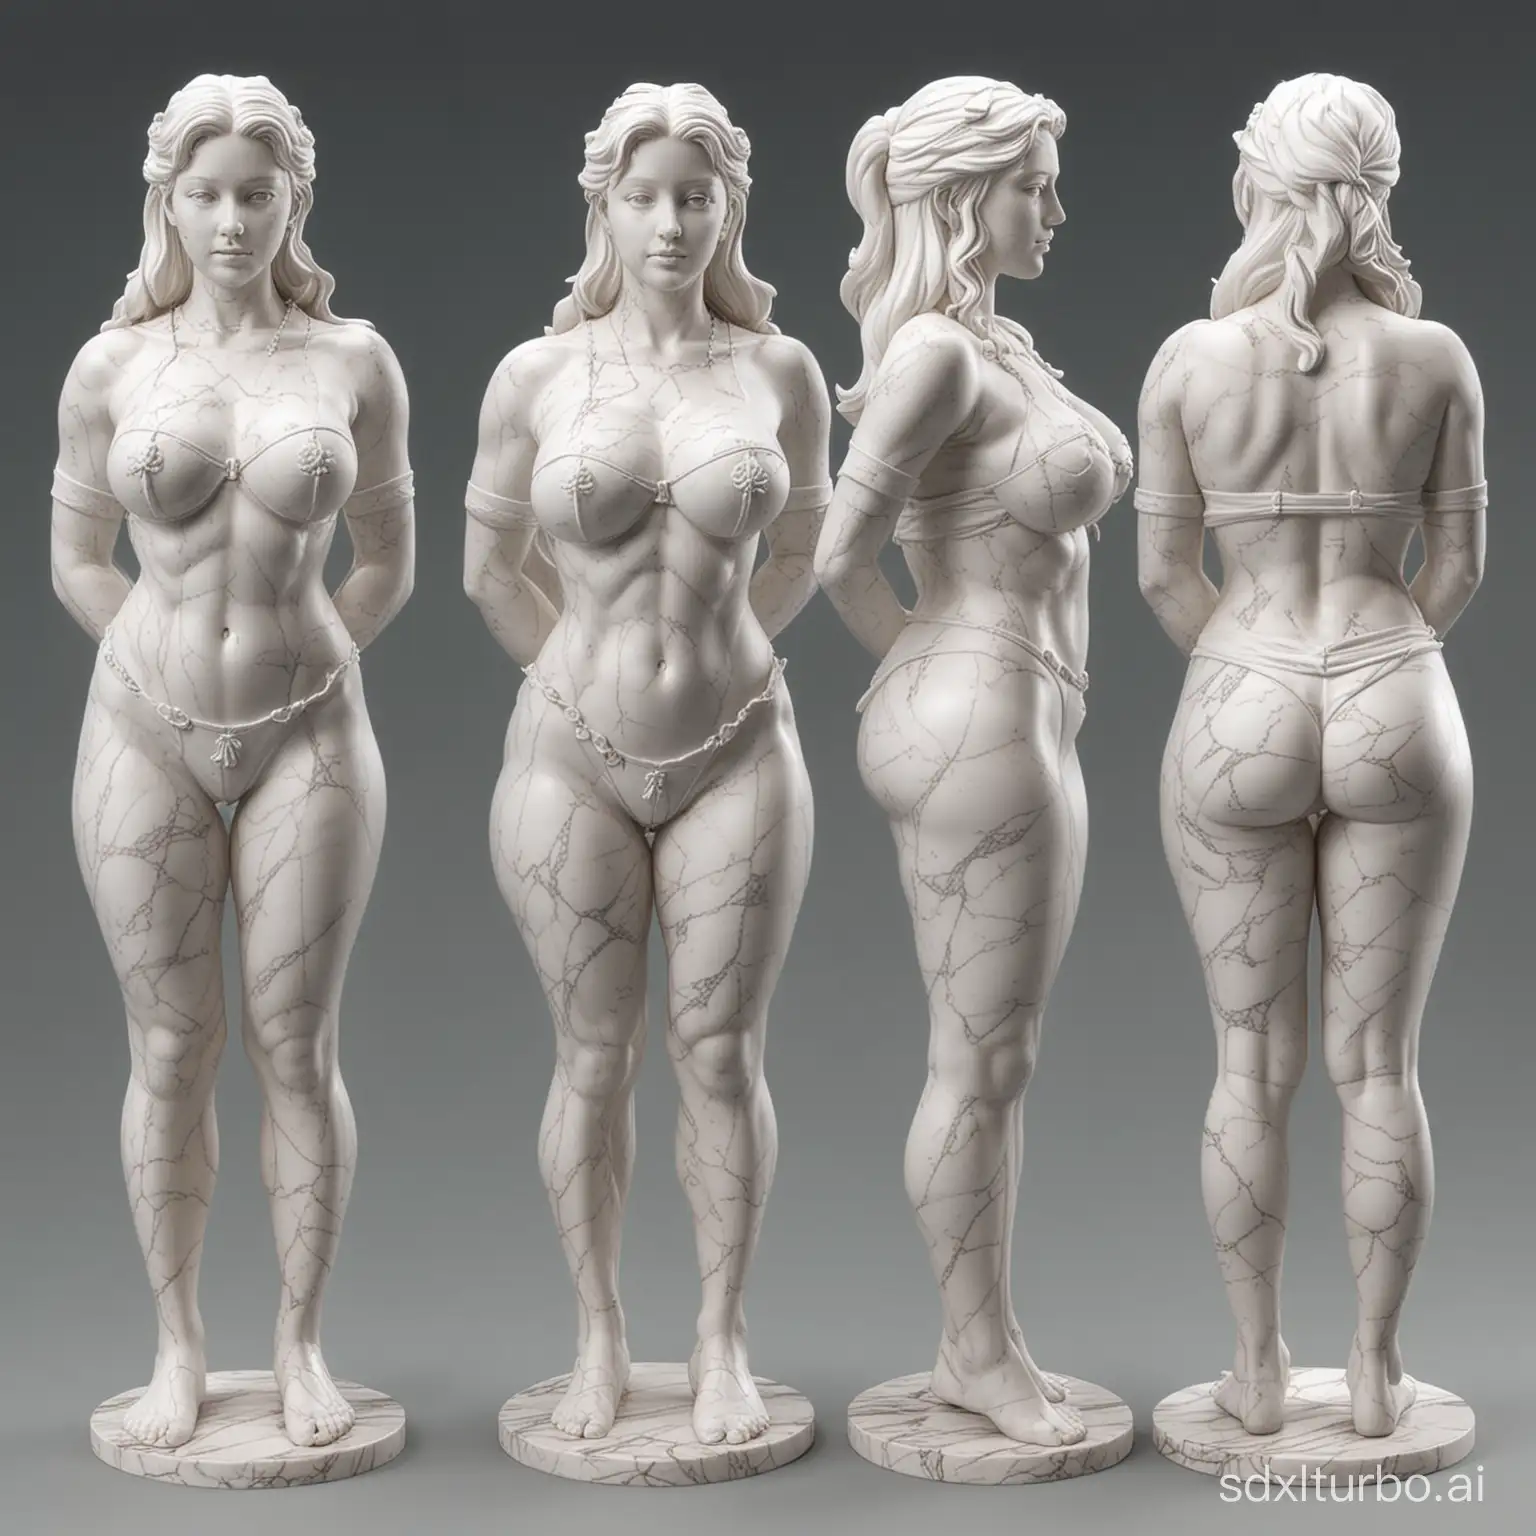 Sculpture-of-a-Sailor-Suit-Girl-Front-Left-and-Rear-Views-in-3D-White-Marble